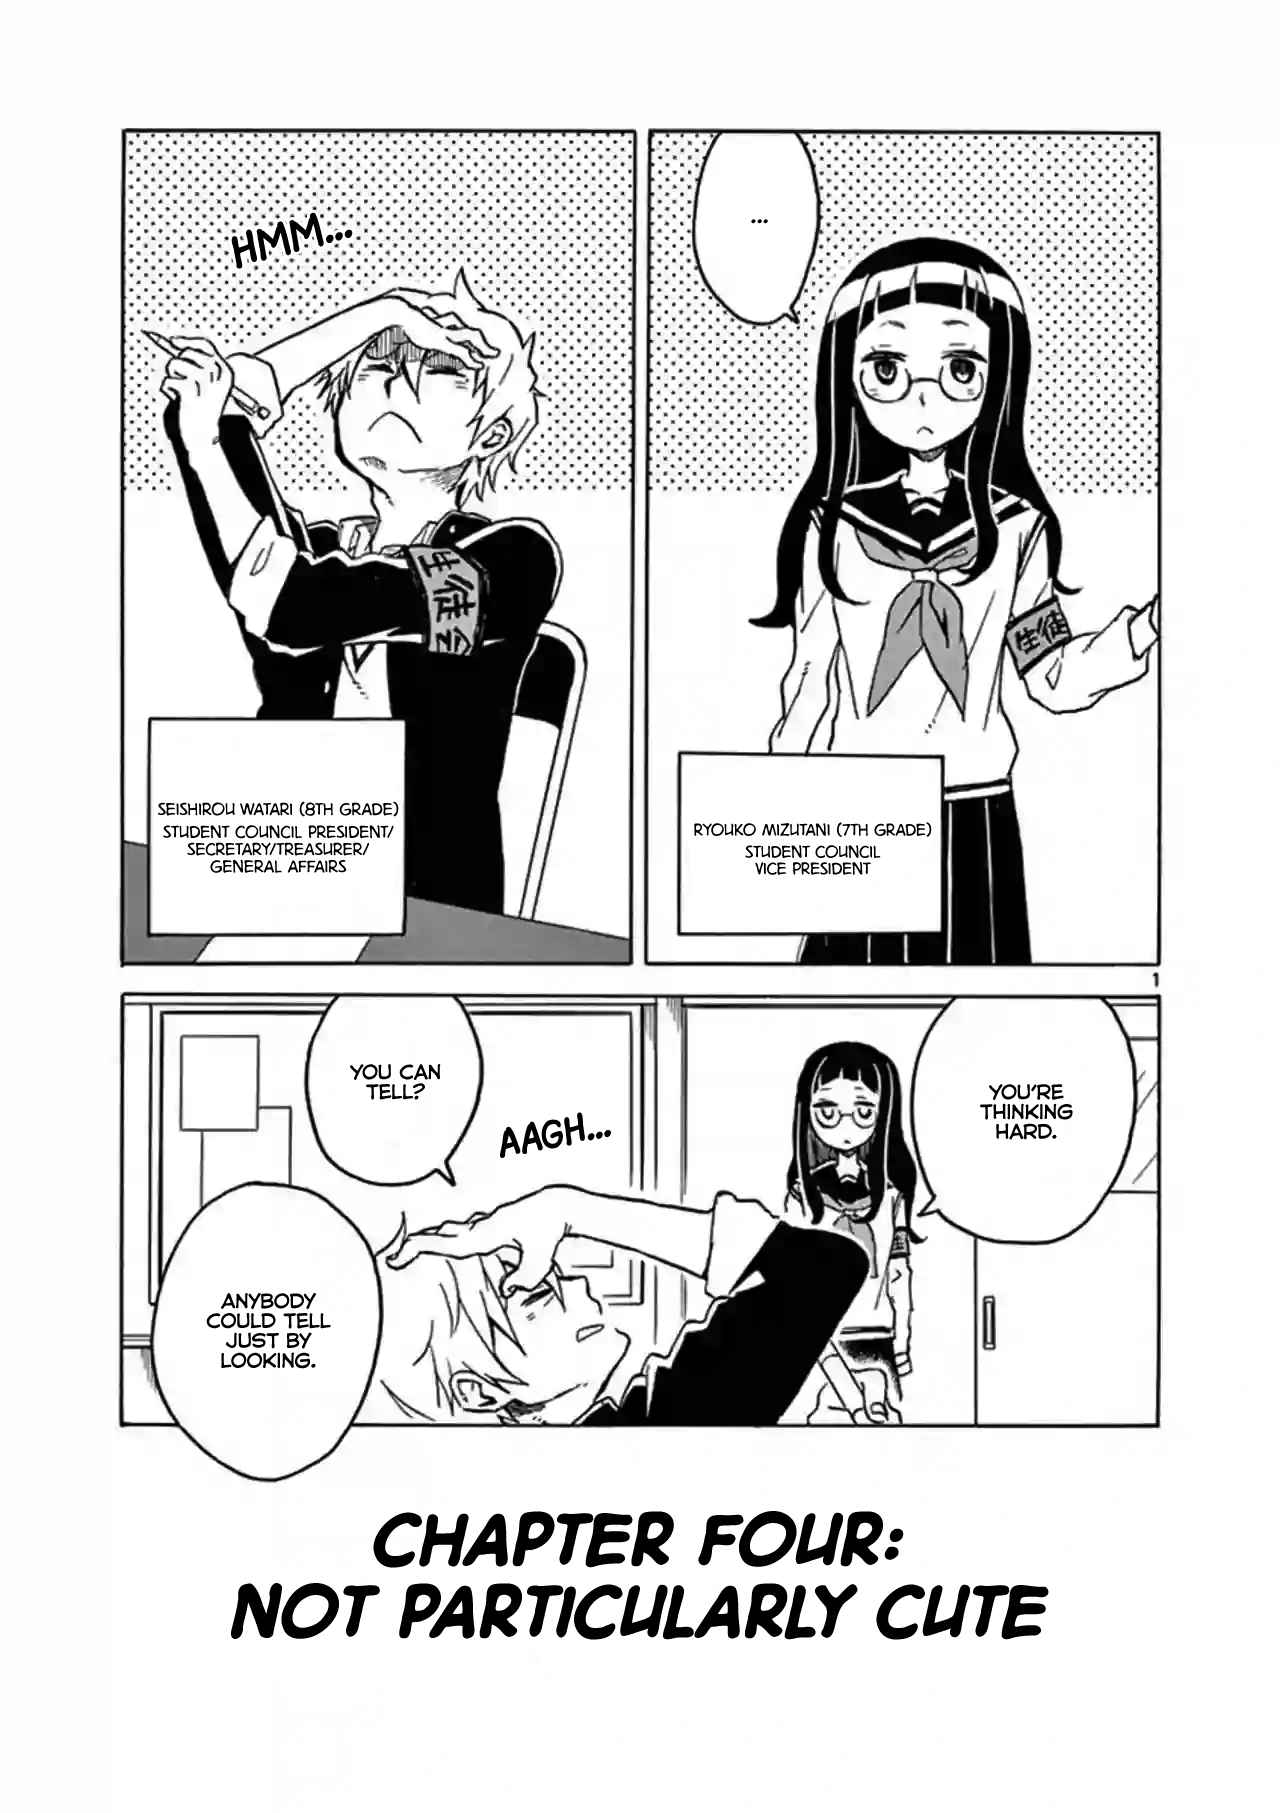 Student Council for Two Ch. 4 Not Particularly Cute